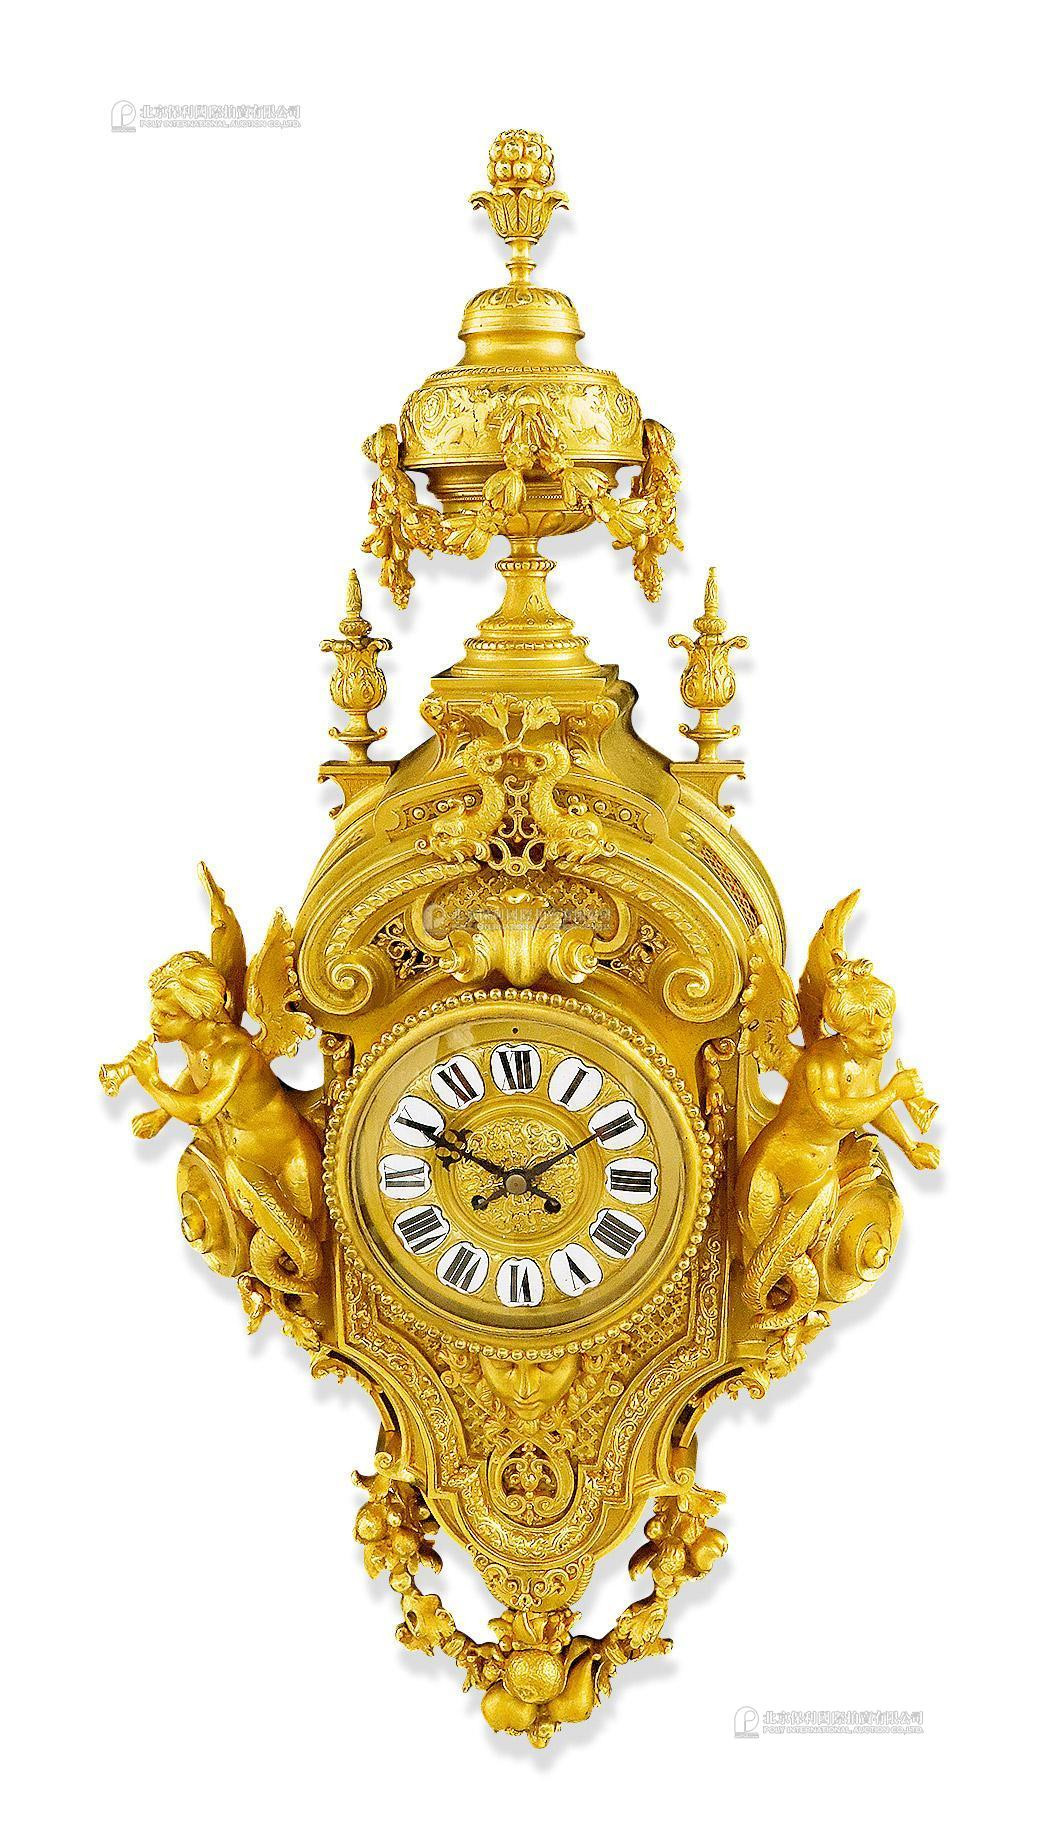 LOUIS-PHILIPPE A FRENCH GILT BRONZE DECORATIVE WALLCLOCK WITH ENAMEL DIAL